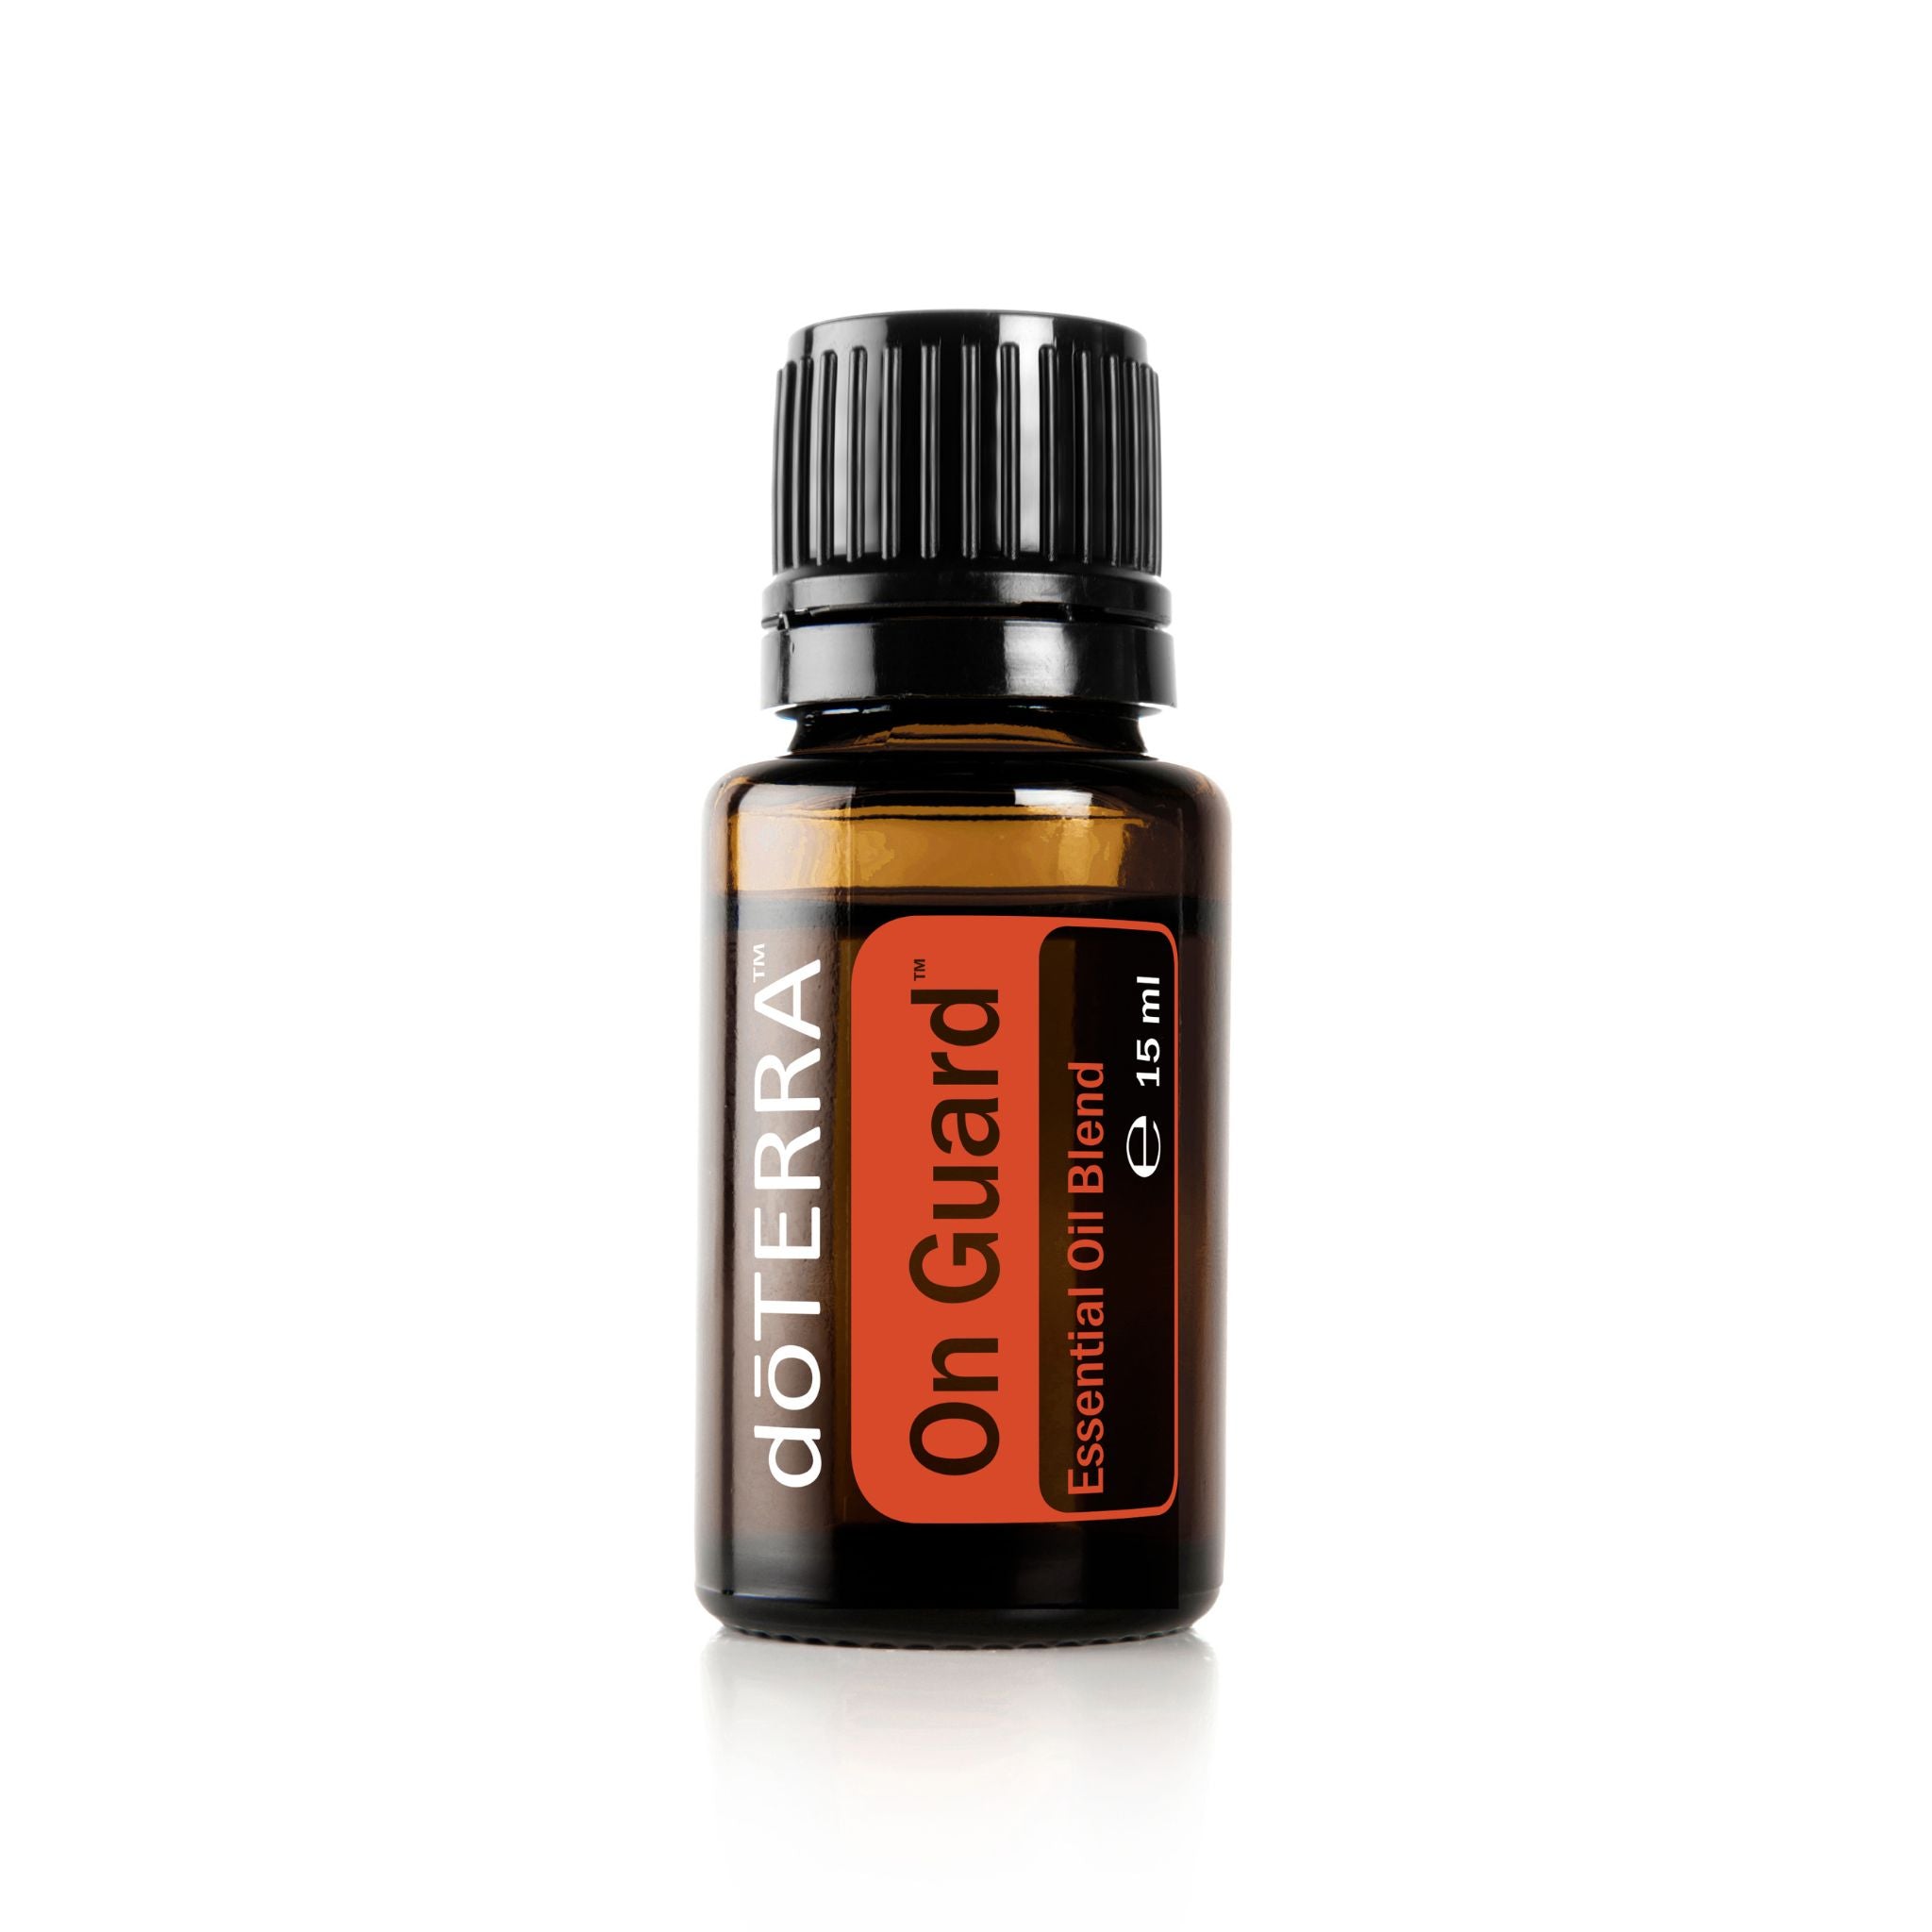 On Guard Essential Oil has energising and uplifting aroma. Glass bottle, red label, 15 ml